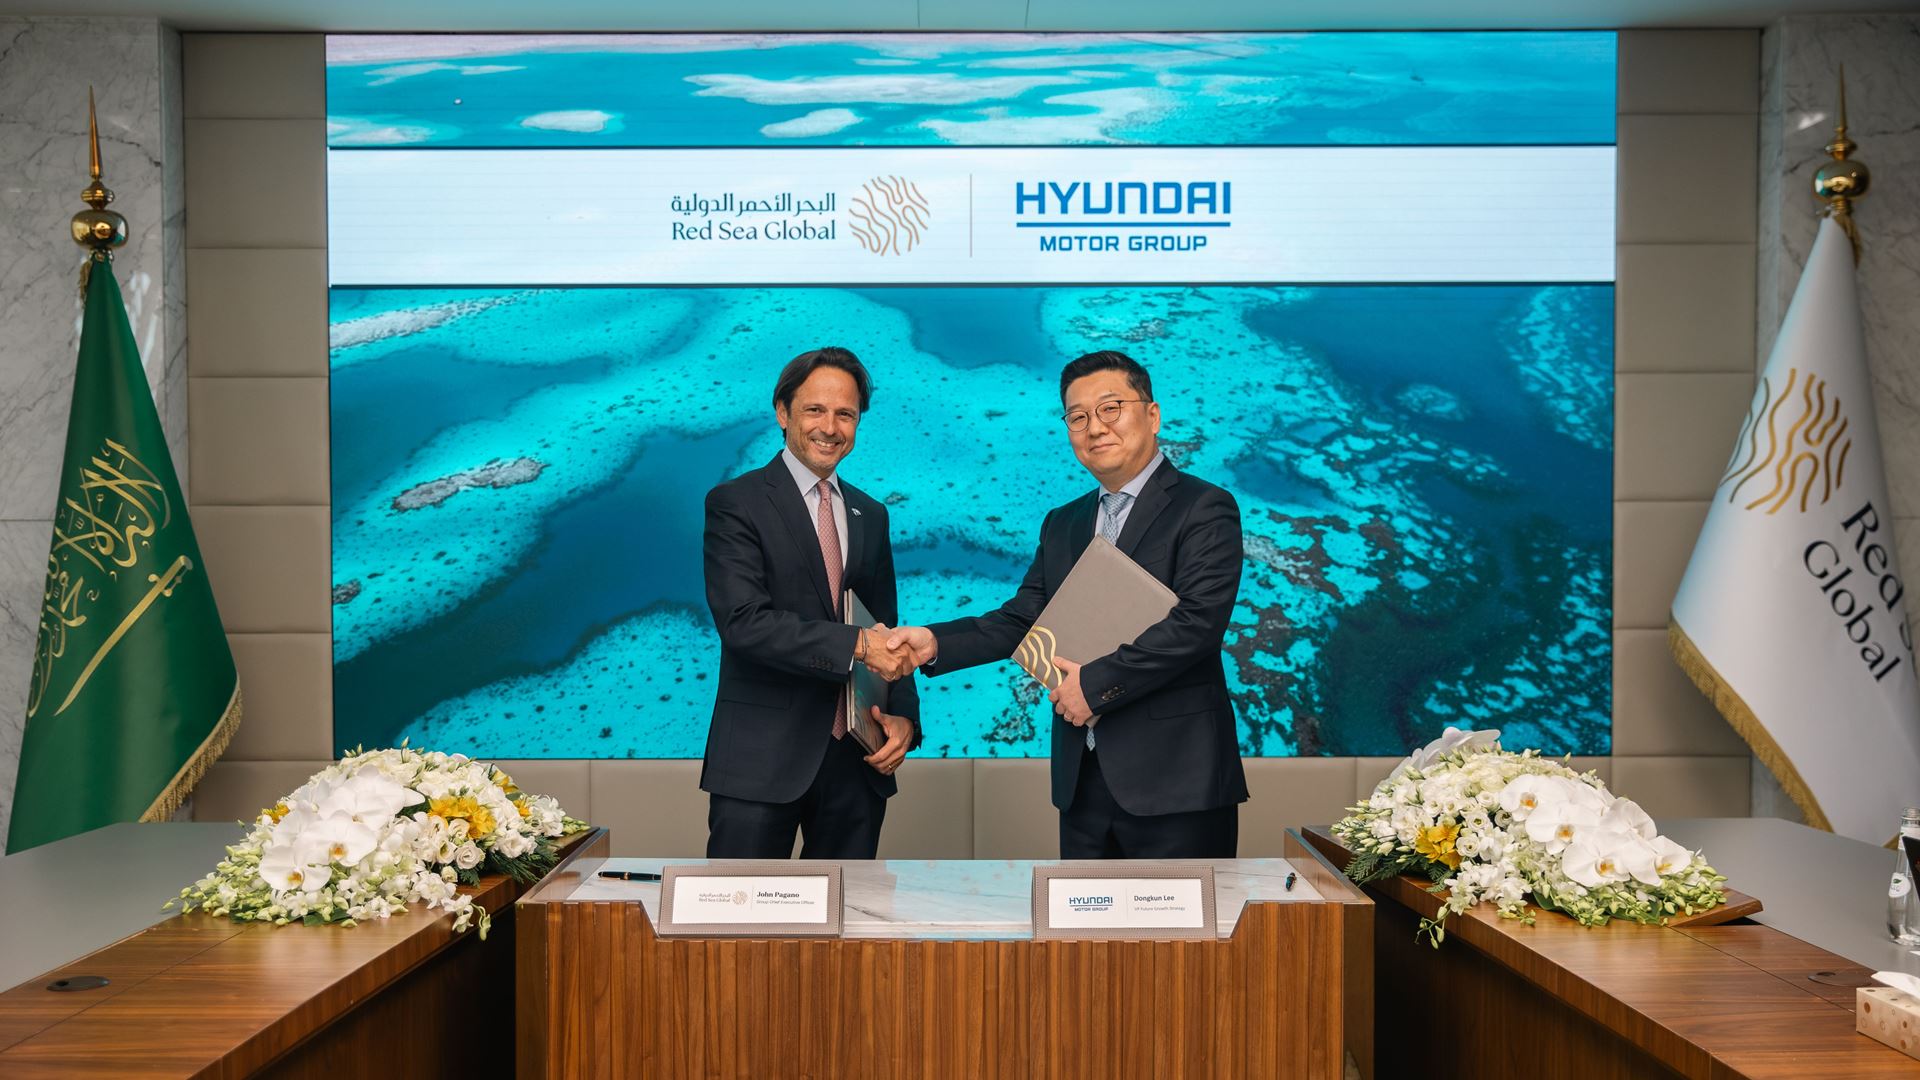 (left) John Pagano, Group CEO of Red Sea Global and (right) Dongkun Lee, Head of Future Growth Strategy Sub-Division